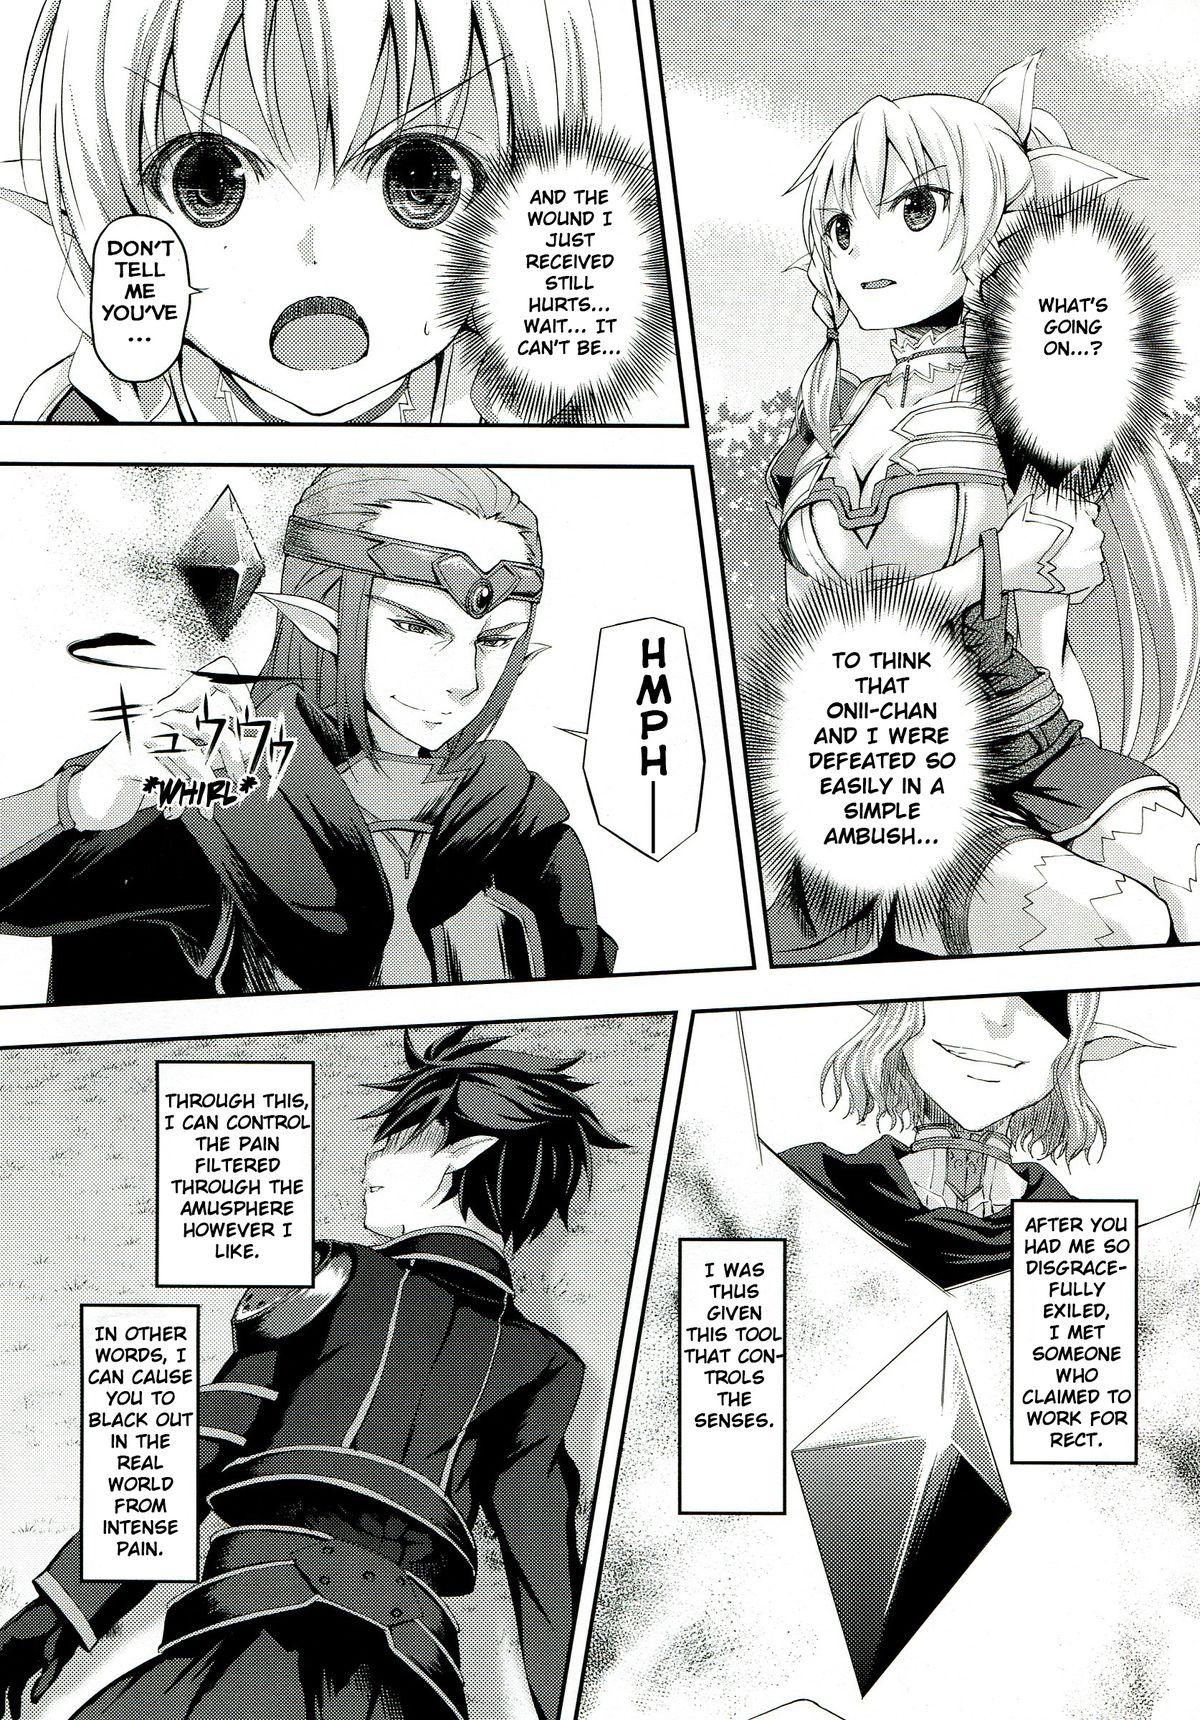 Cheat SISTER FAERIE - Sword art online Argentino - Page 6